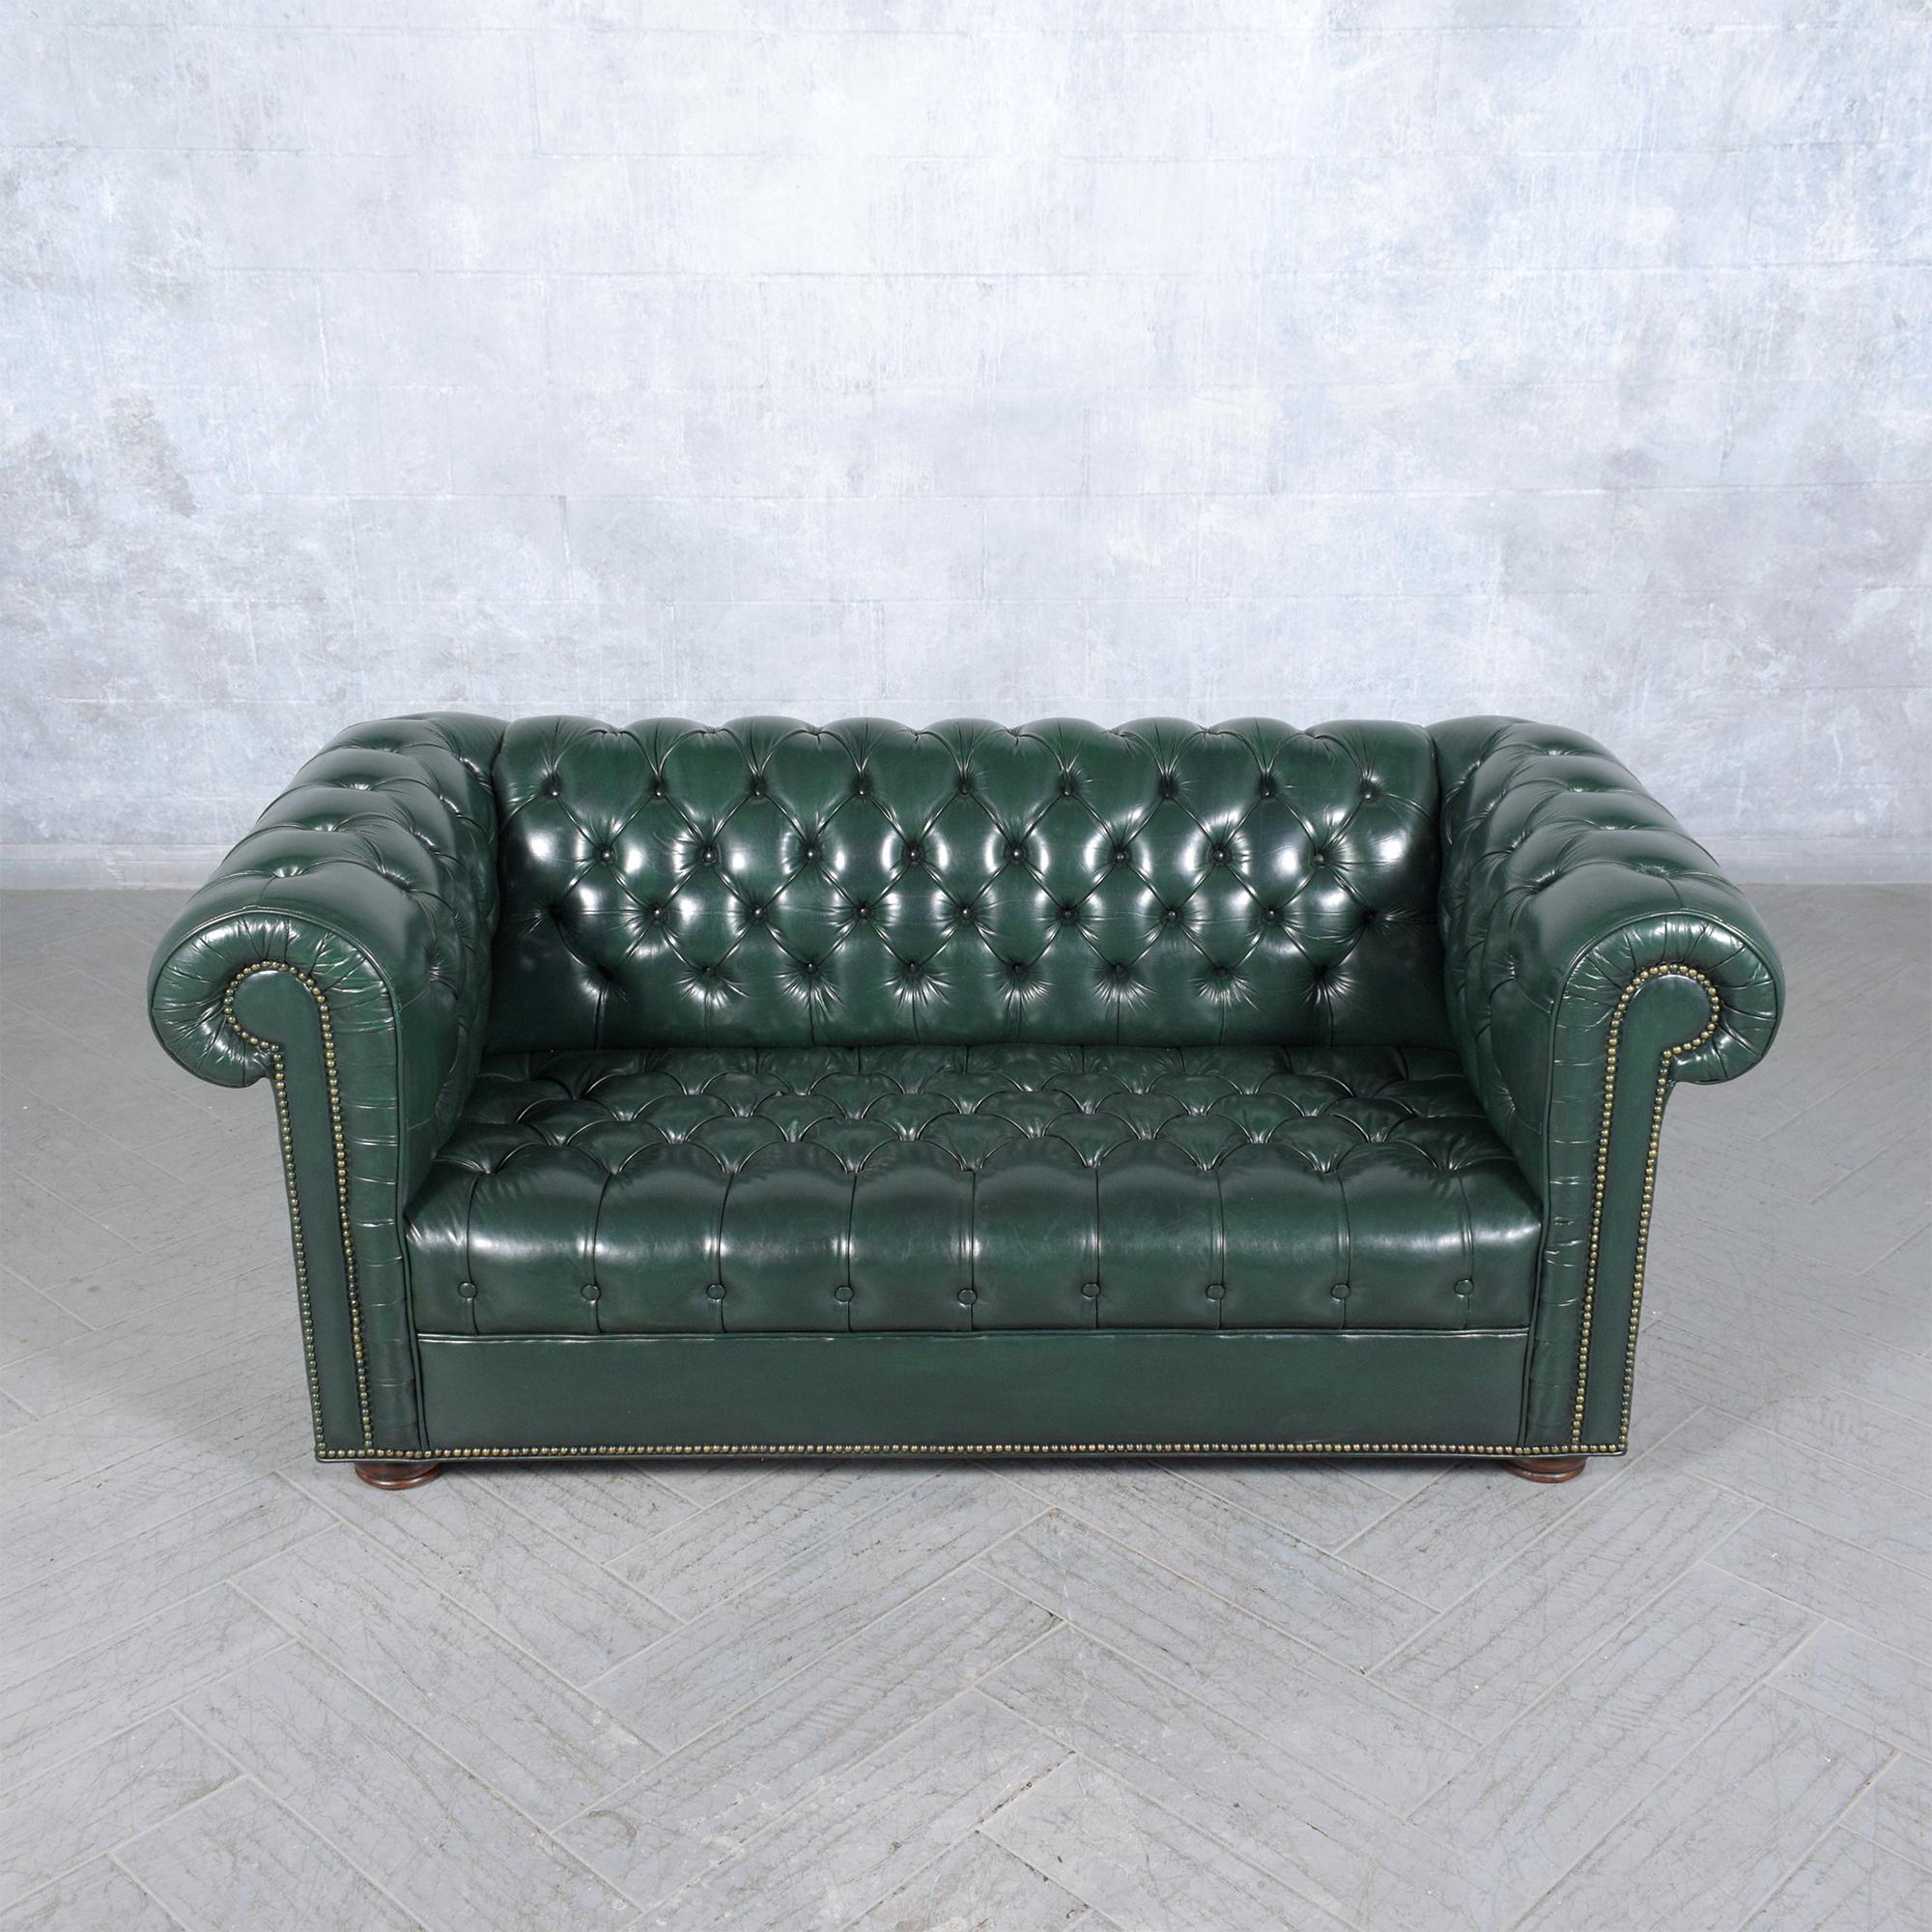 Mid-20th Century 1970s Vintage Chesterfield Sofa: Emerald Green Leather with Elegant Carved Legs